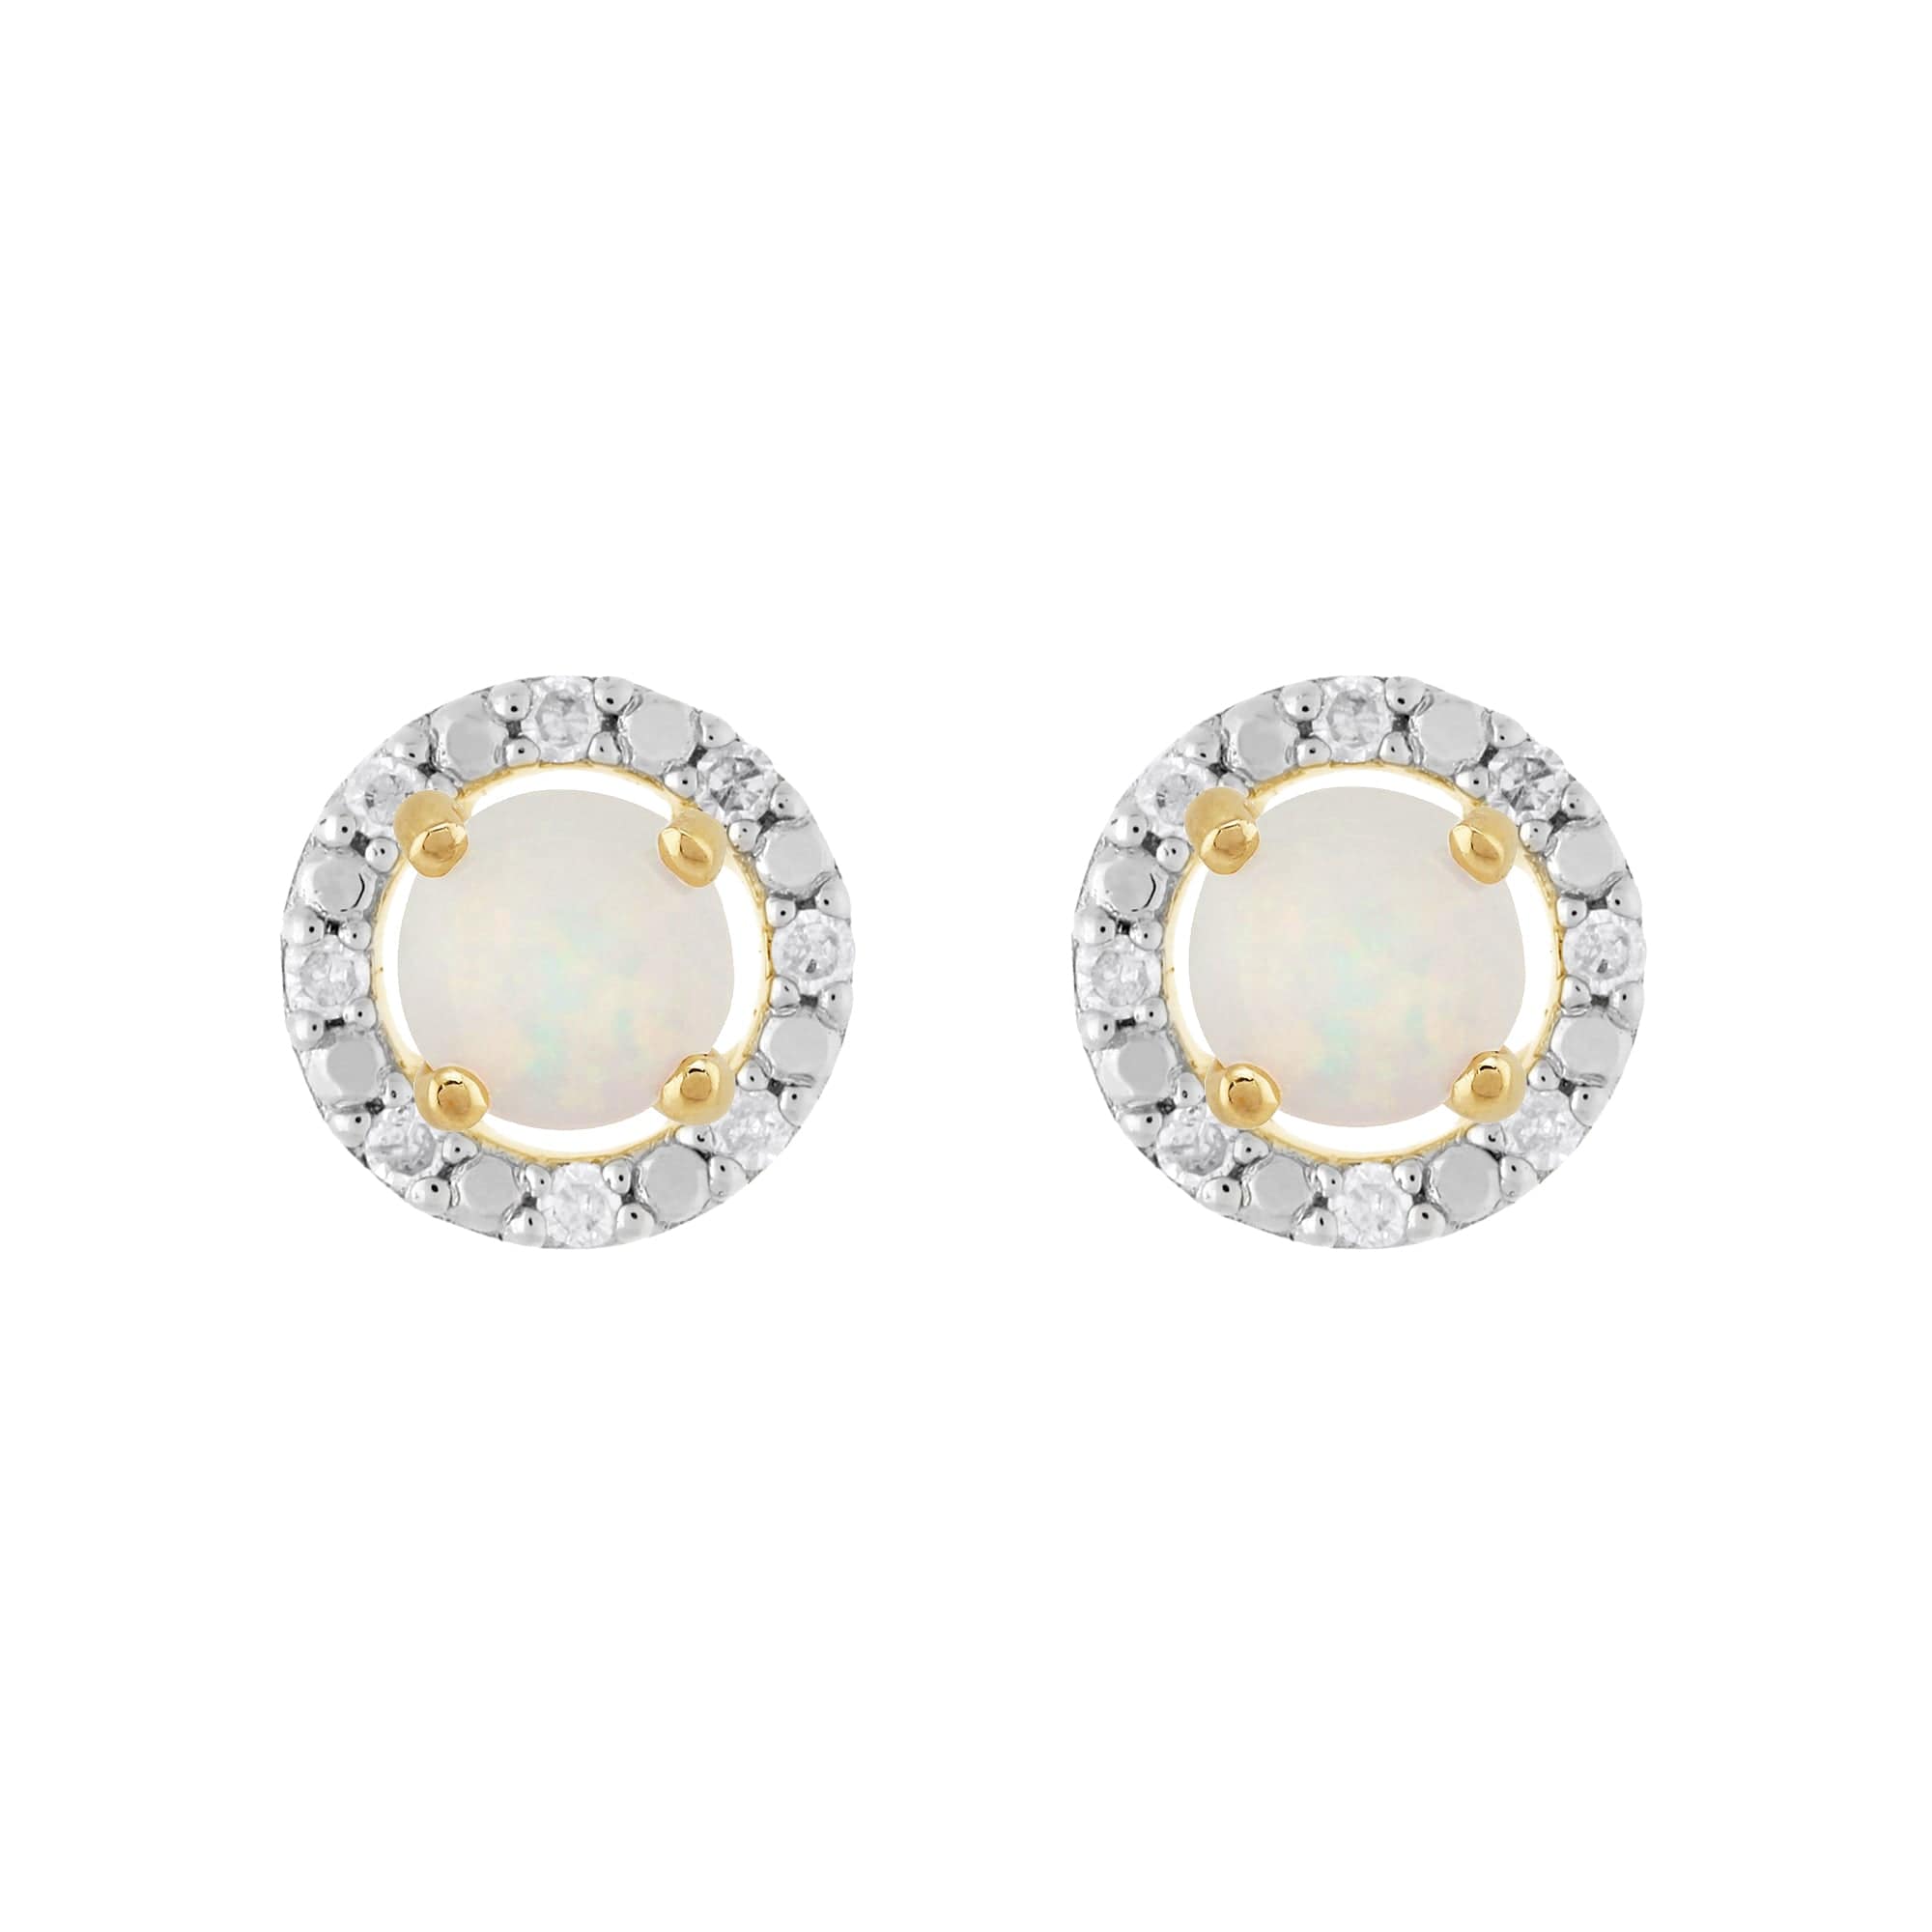 26942-191E0376019 Classic Round Opal Stud Earrings with Detachable Diamond Round Earrings Jacket Set in 9ct Yellow Gold 1